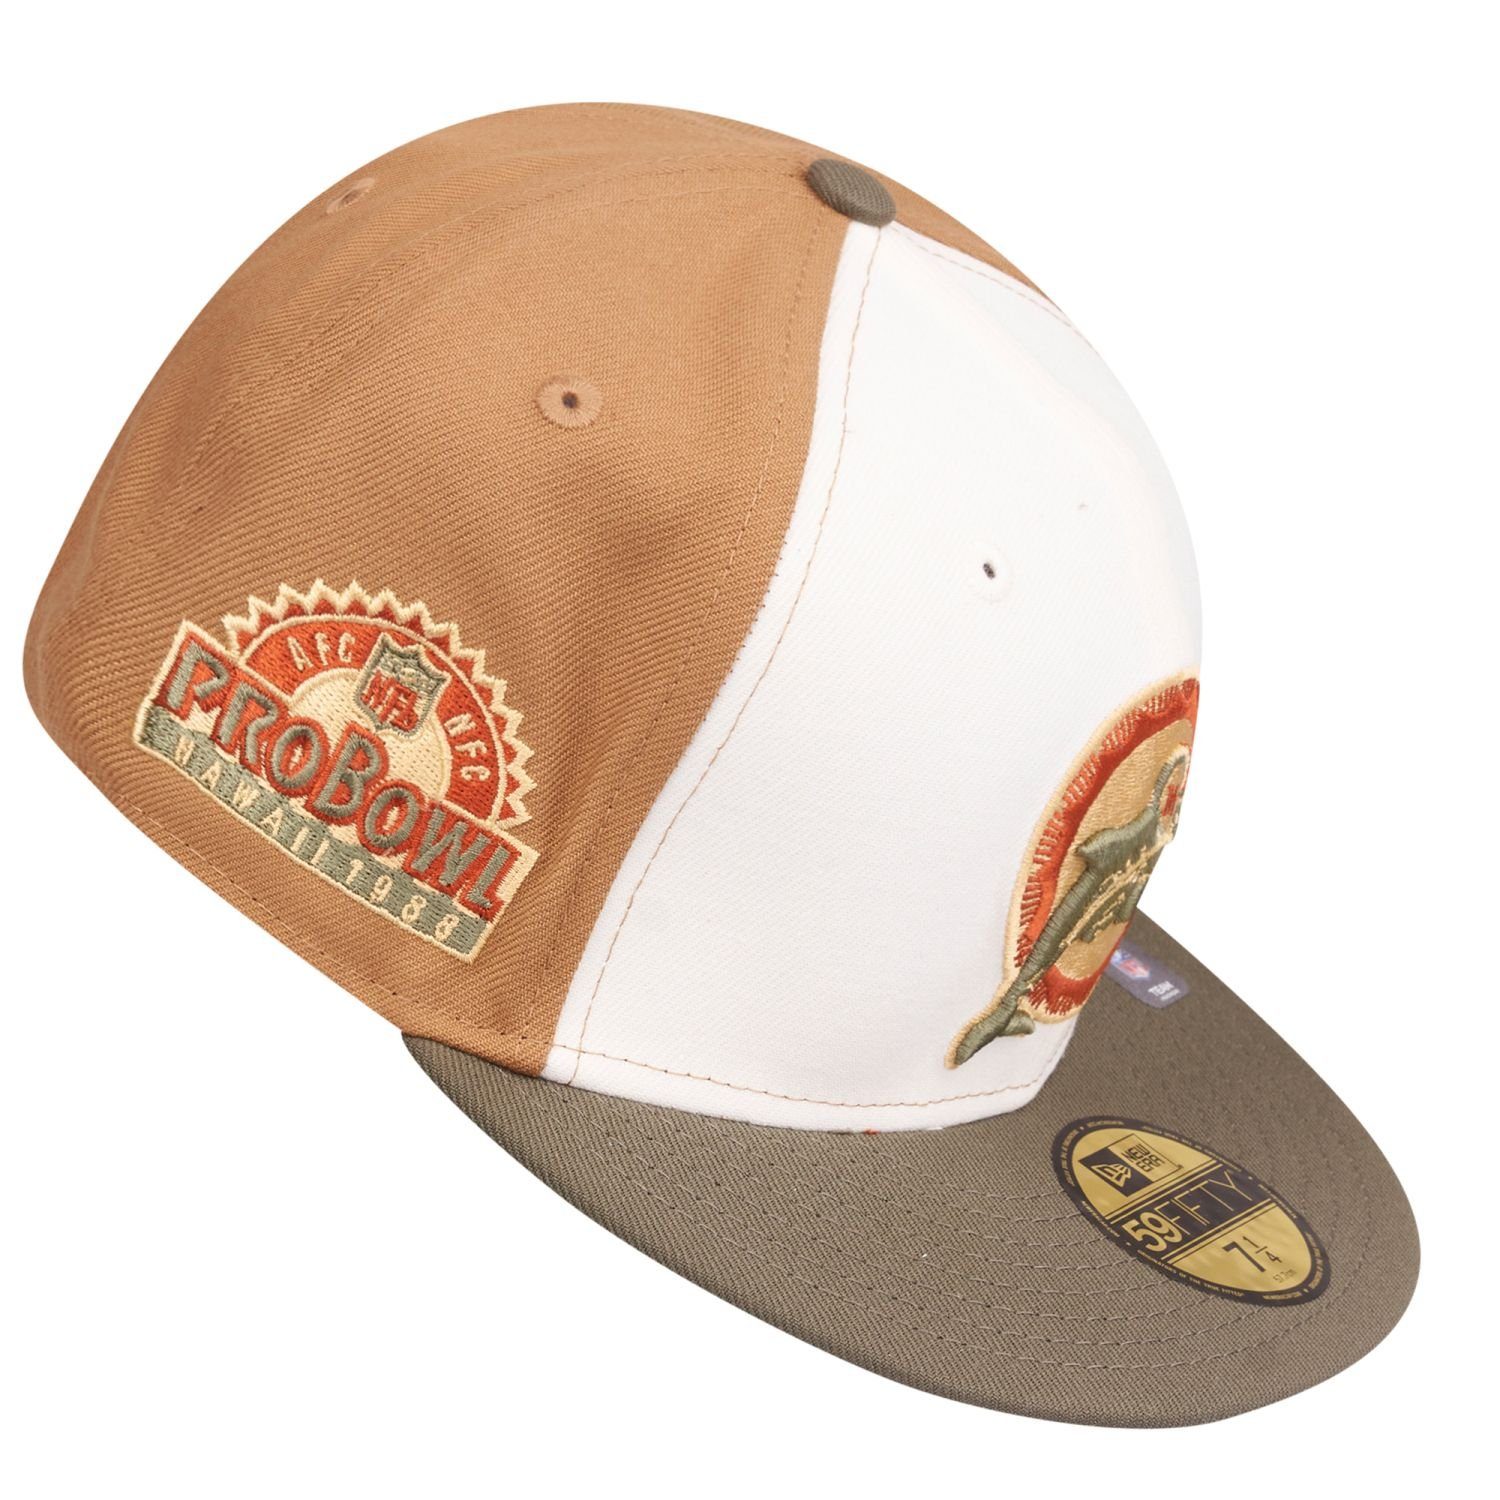 New Era Fitted Cap 59Fifty Dolphins Throwback Miami